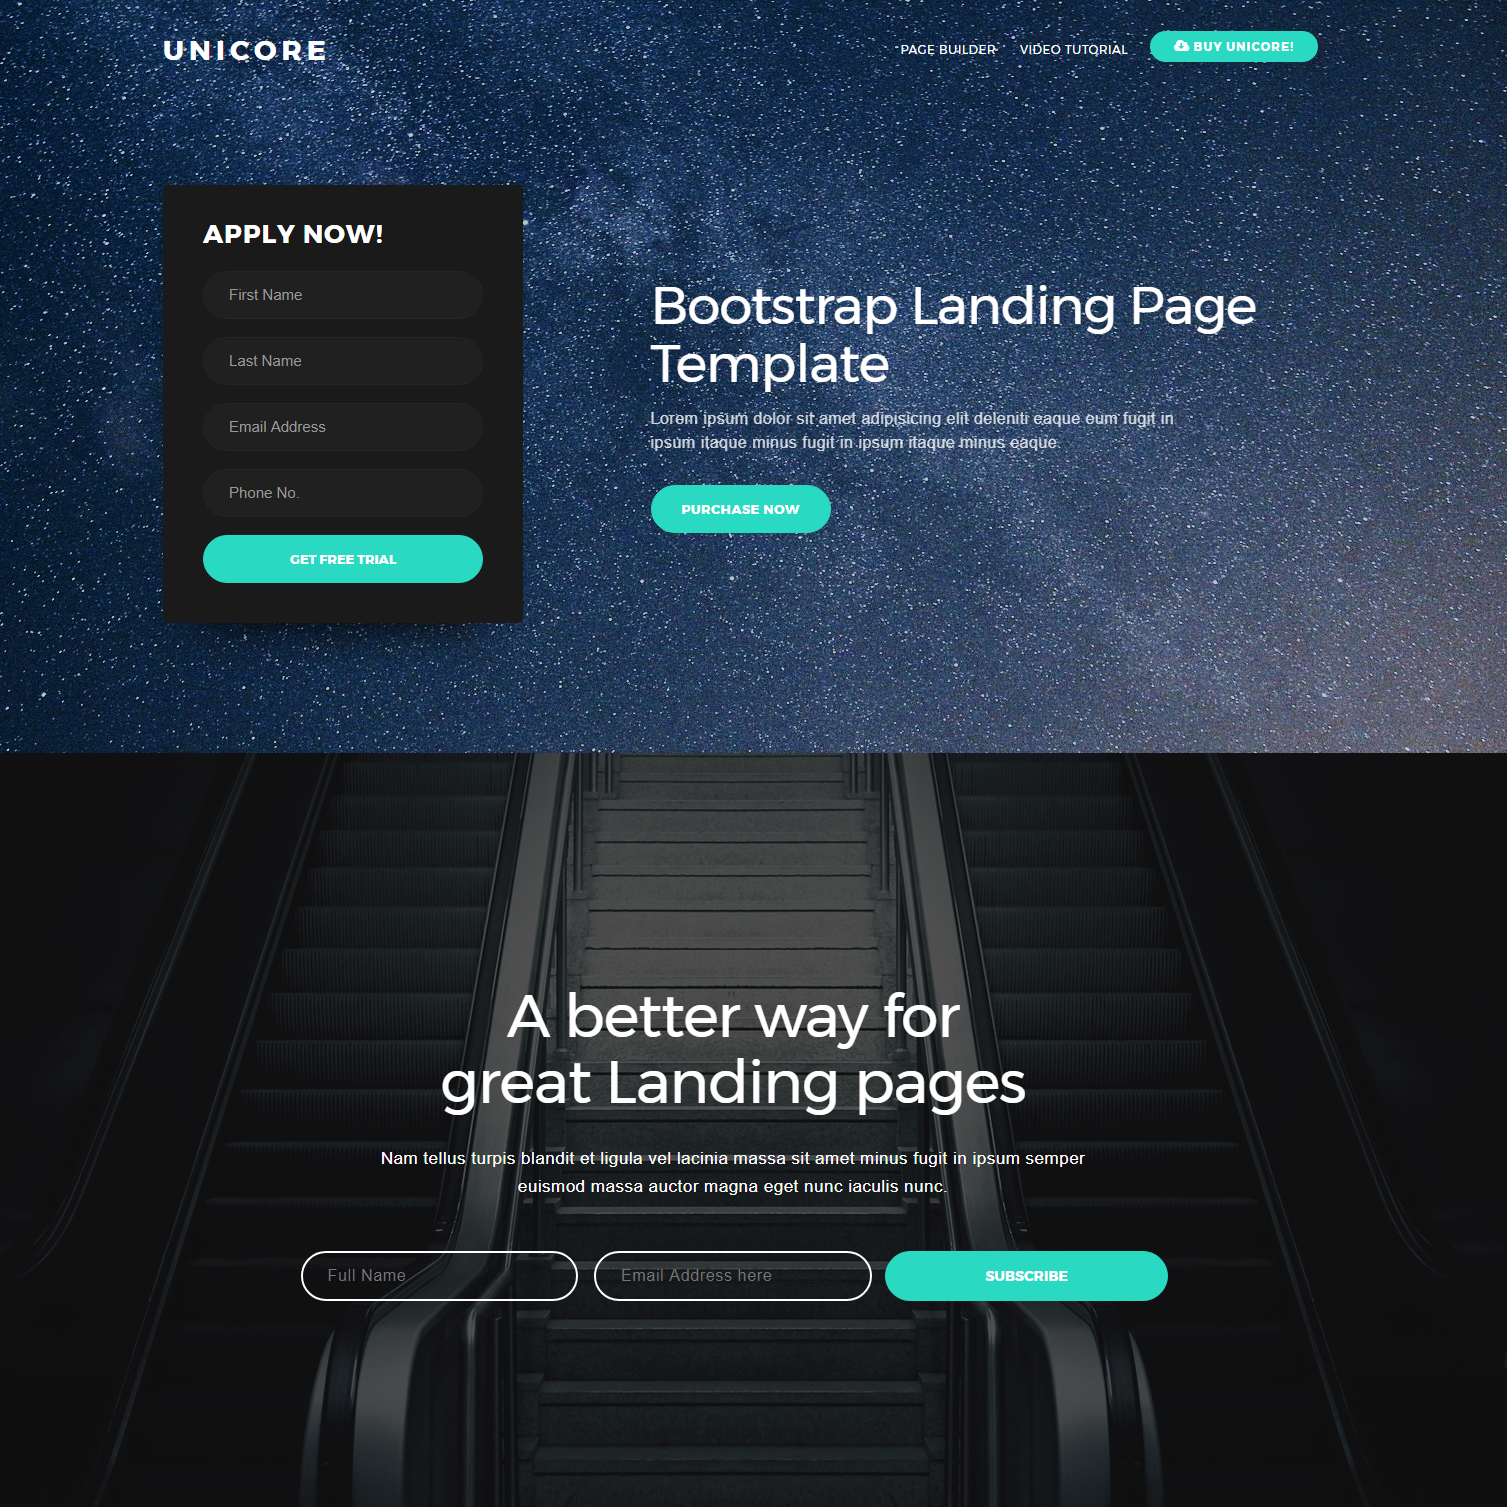 CSS3 Bootstrap One Page Templates